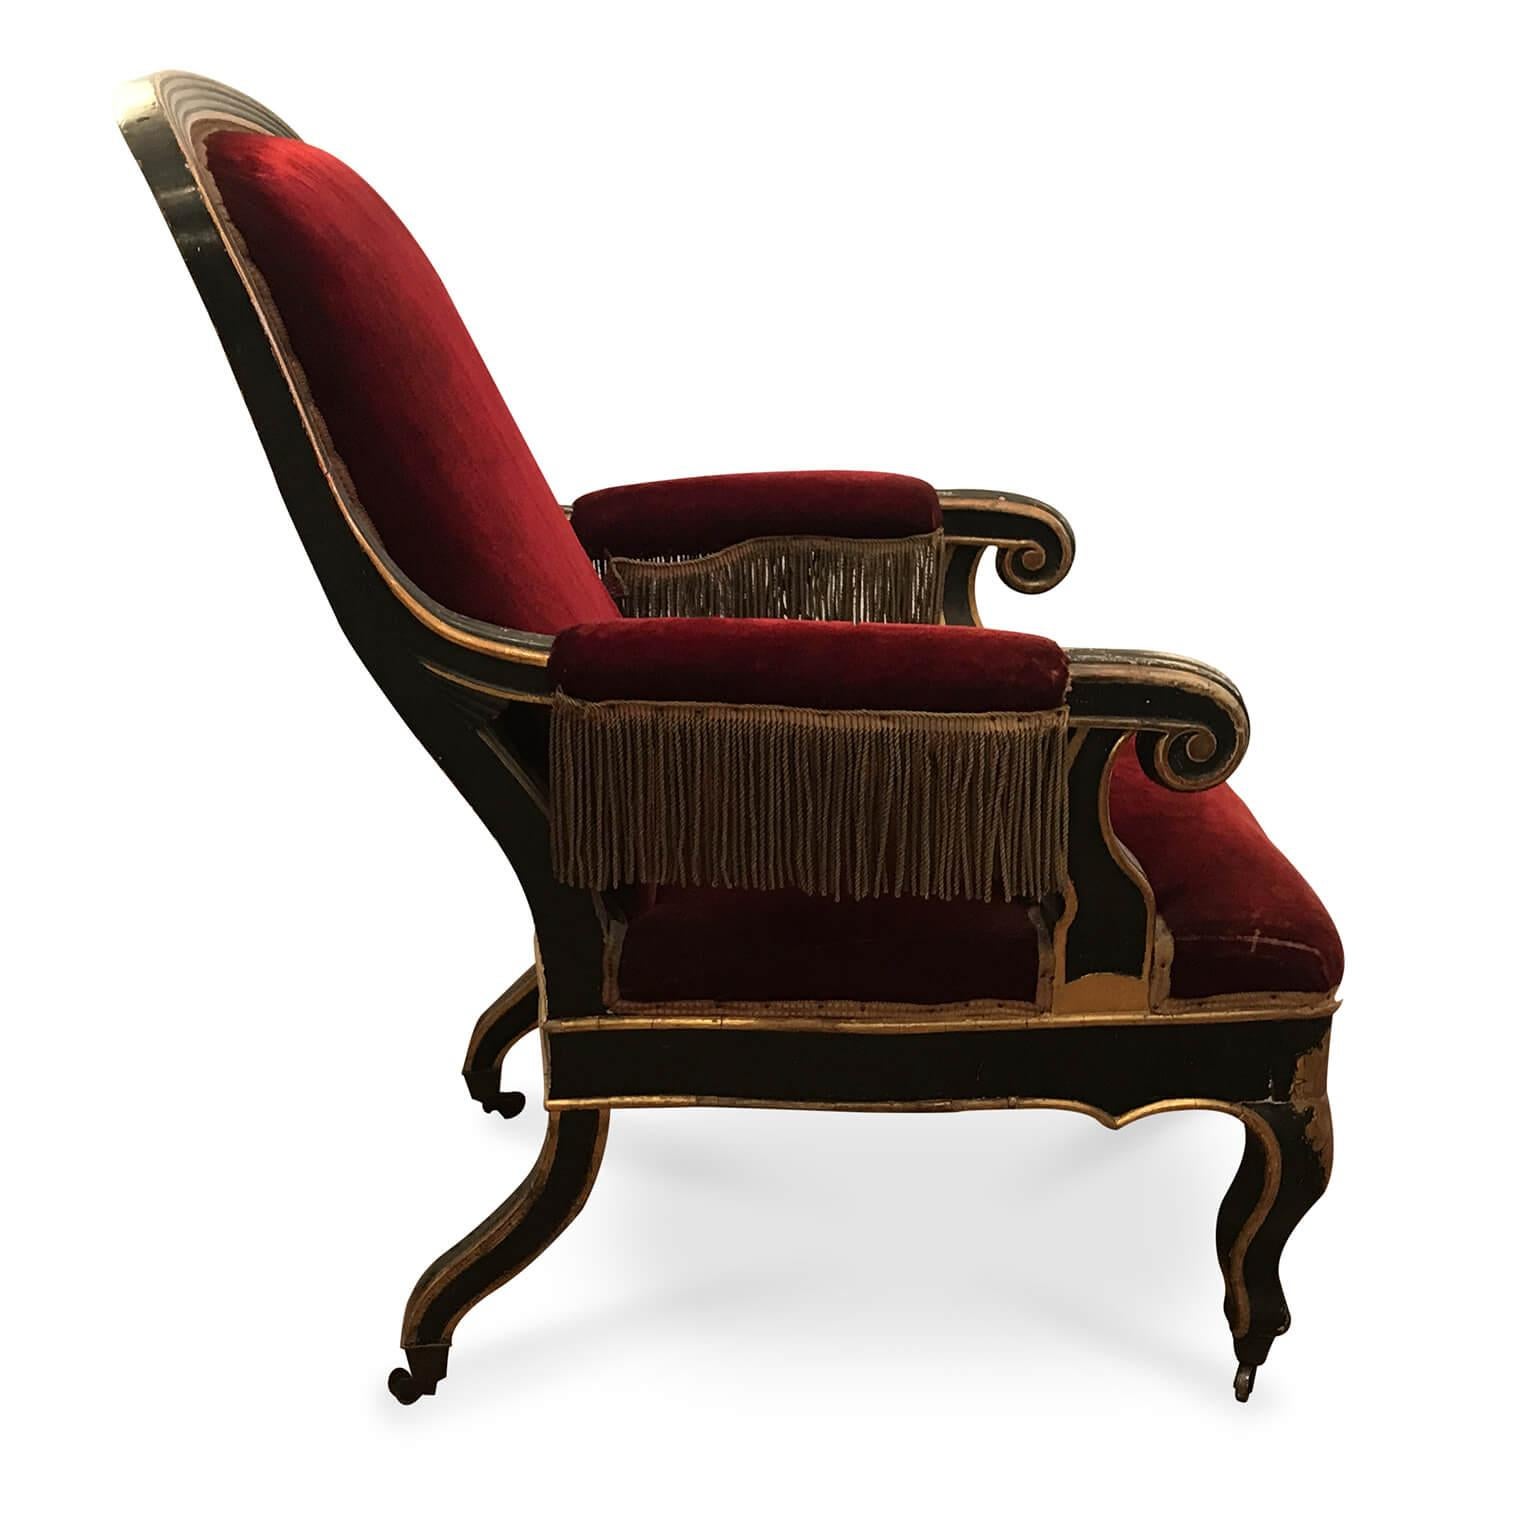 Antique Italian armchair from Sicily and matching footrest, an exclusive elegant Louis Philippe poplar armchair dating back to the last quarter of 19th century, with a dark lacquer wooden frame decorated with an elegant vegetal gilded motif and